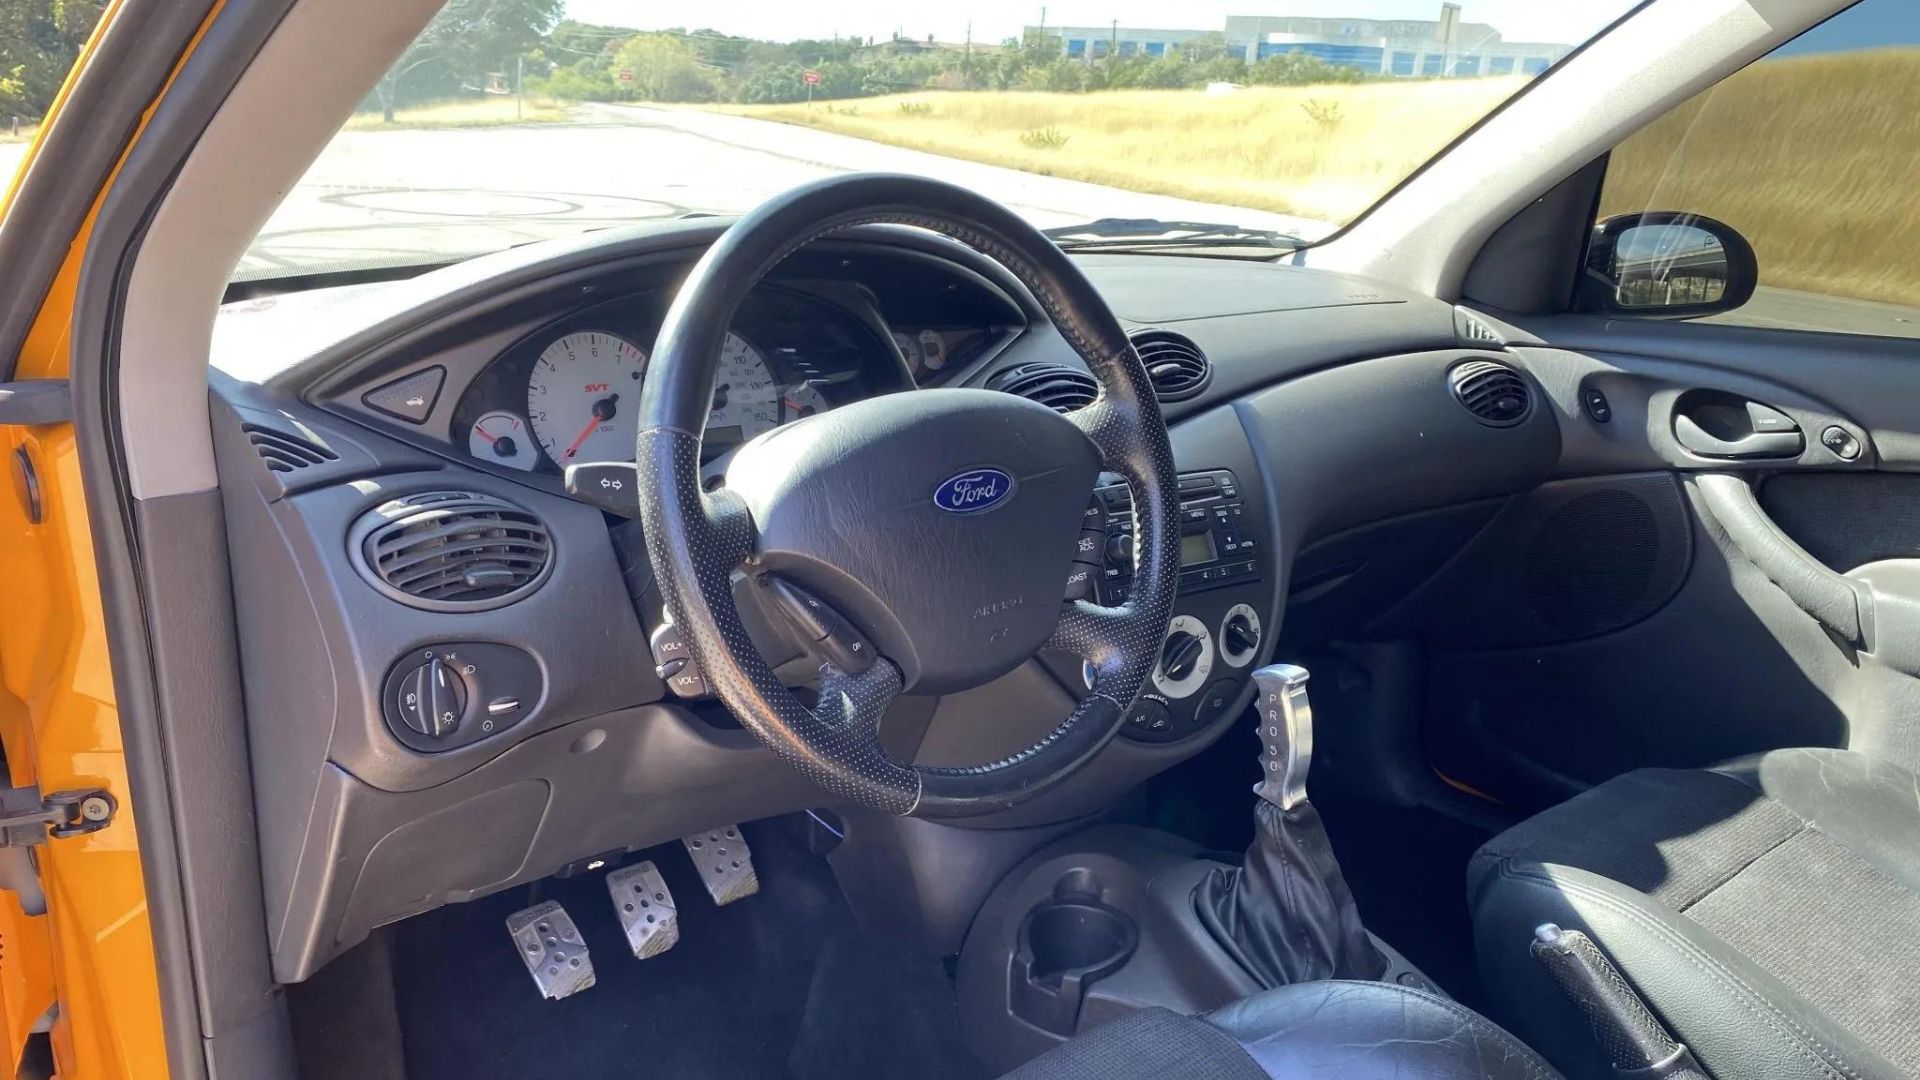 Modified 2003 Ford Focus driver seat view